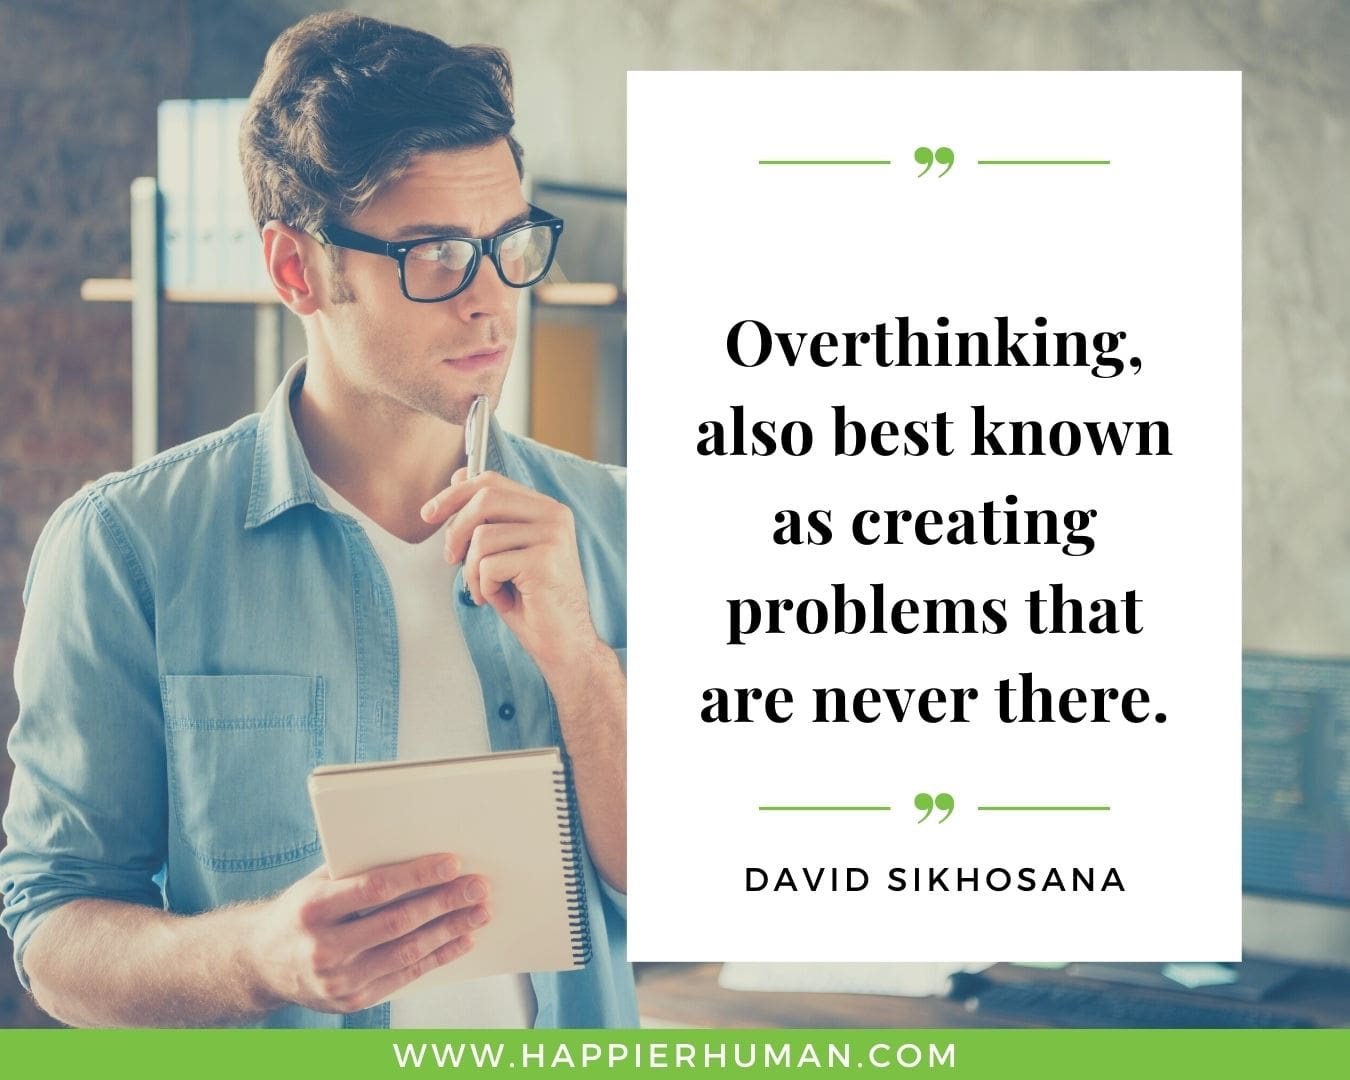 Overthinking Quotes - "Overthinking, also best known as creating problems that are never there." - David Sikhosana